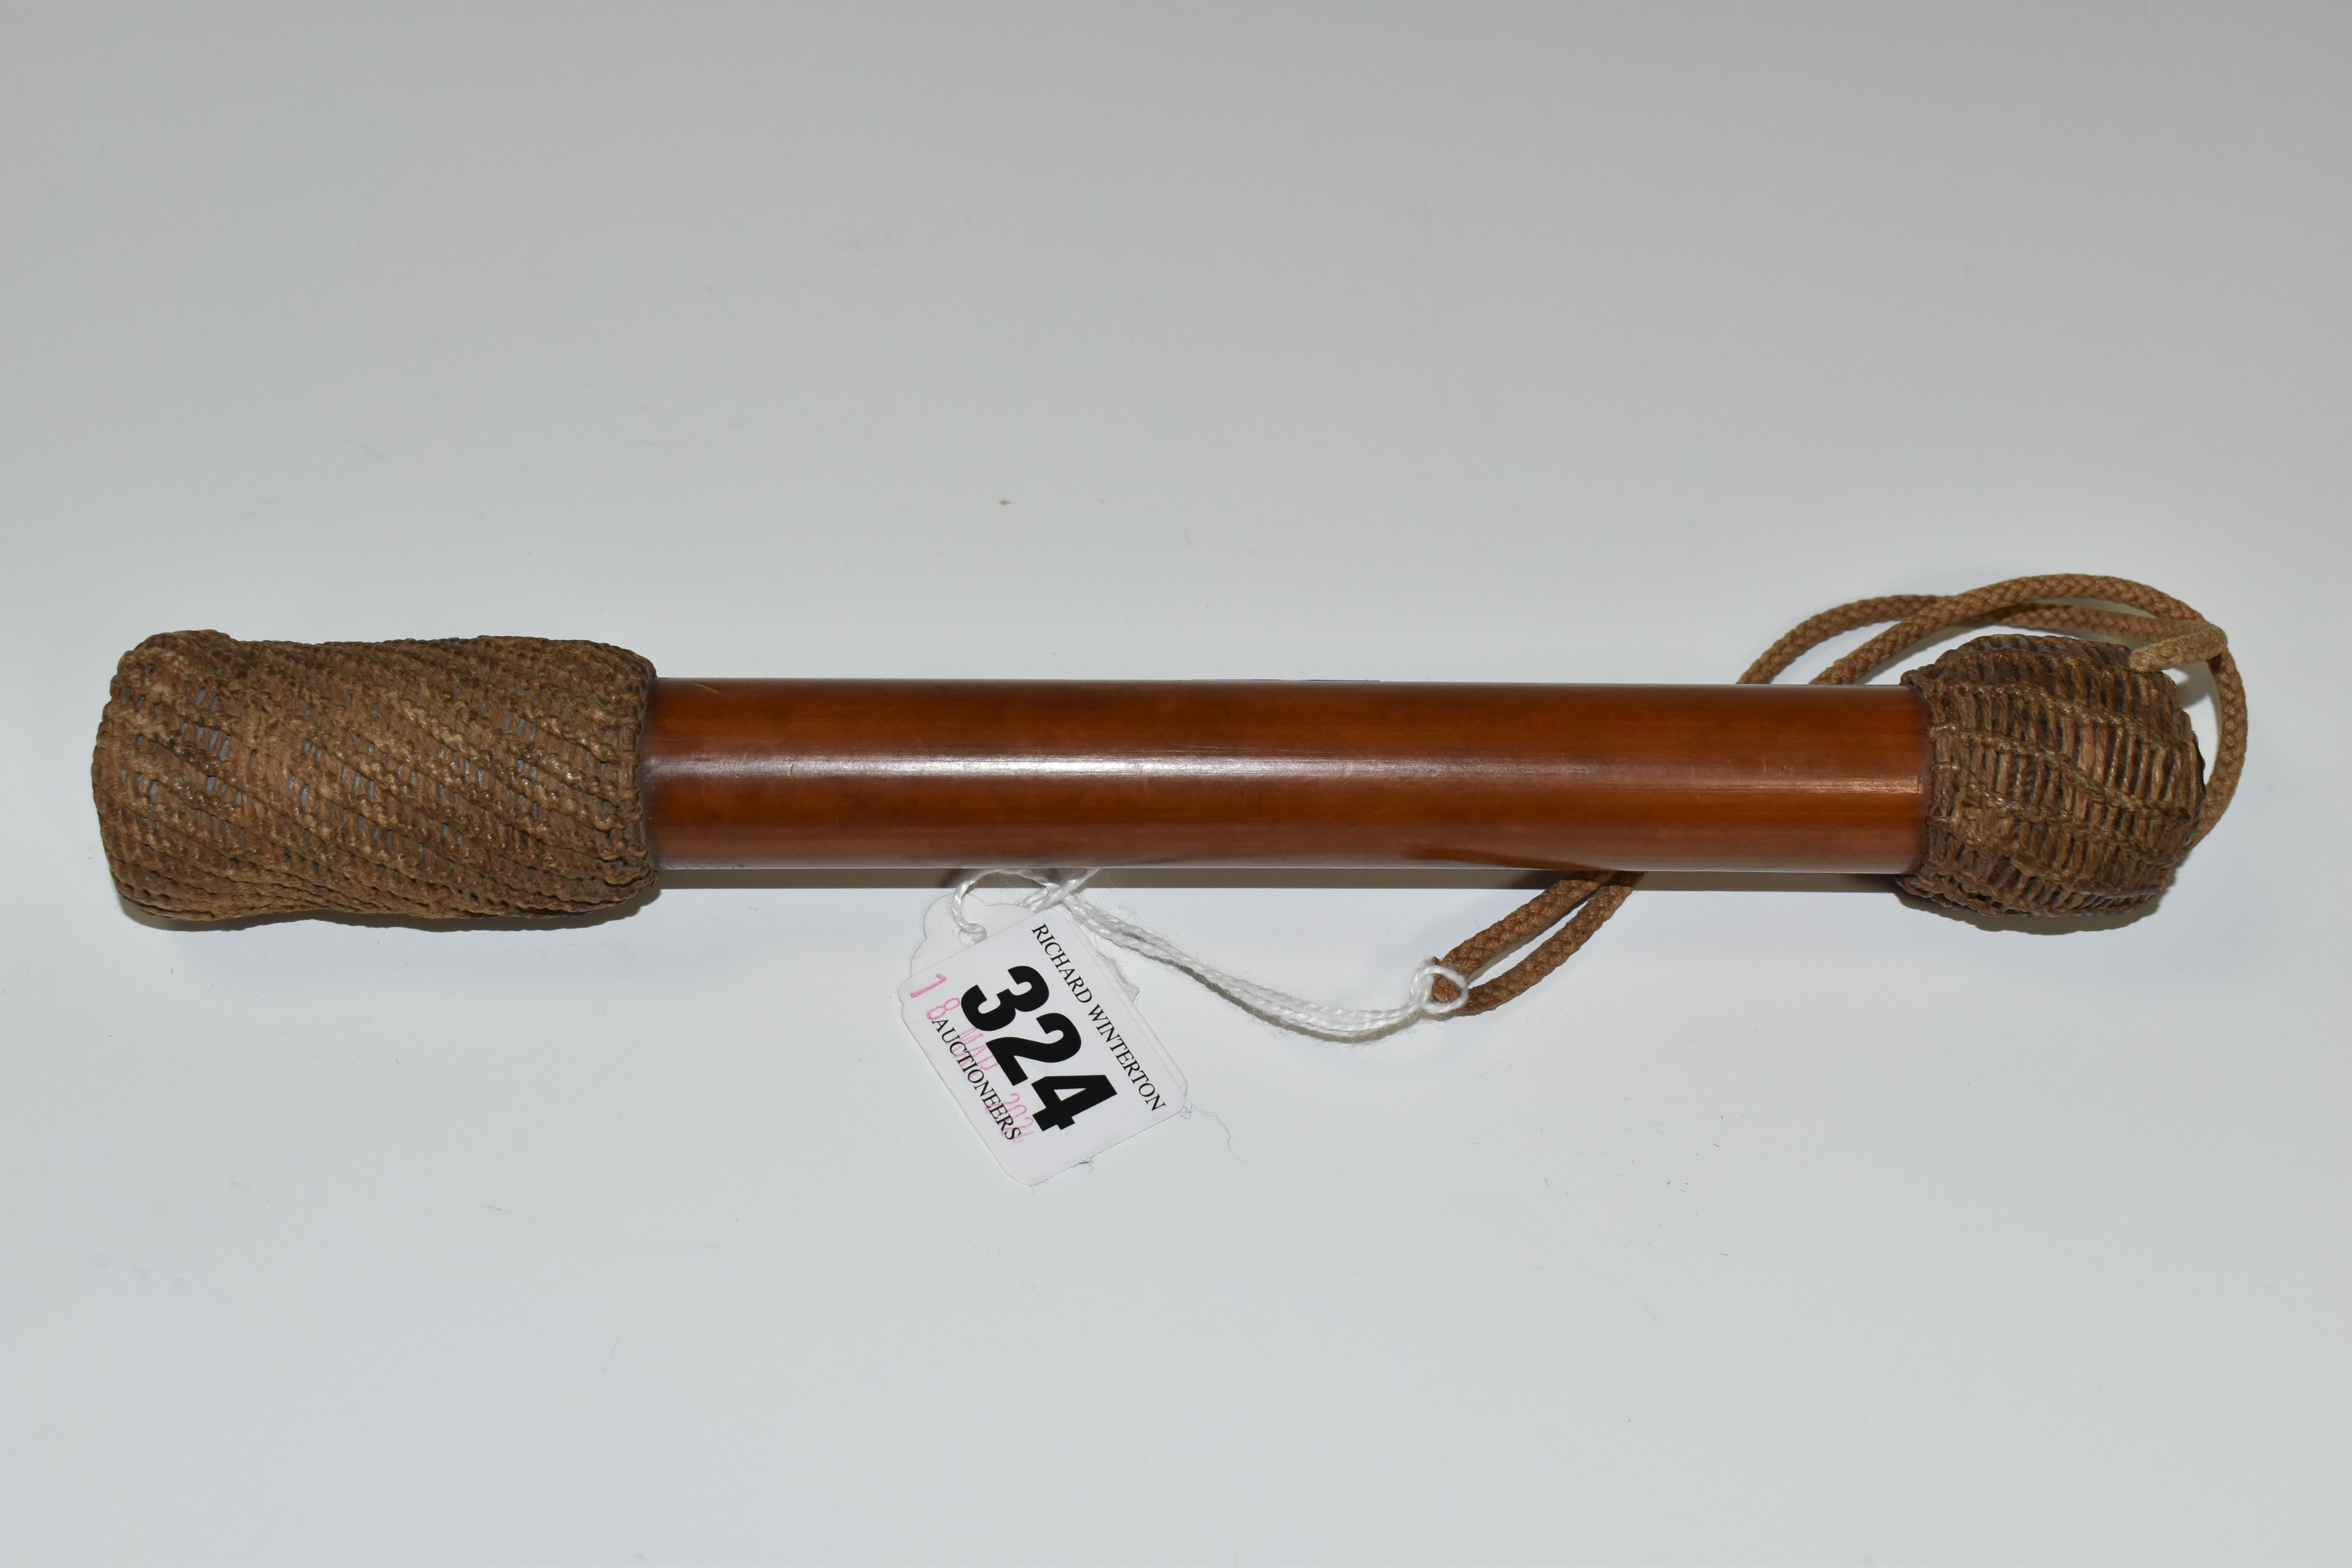 A VICTORIAN NAVAL COSH, 'Boson's Persuader' wooden cosh with plaited and knotted twine and lead - Image 4 of 4